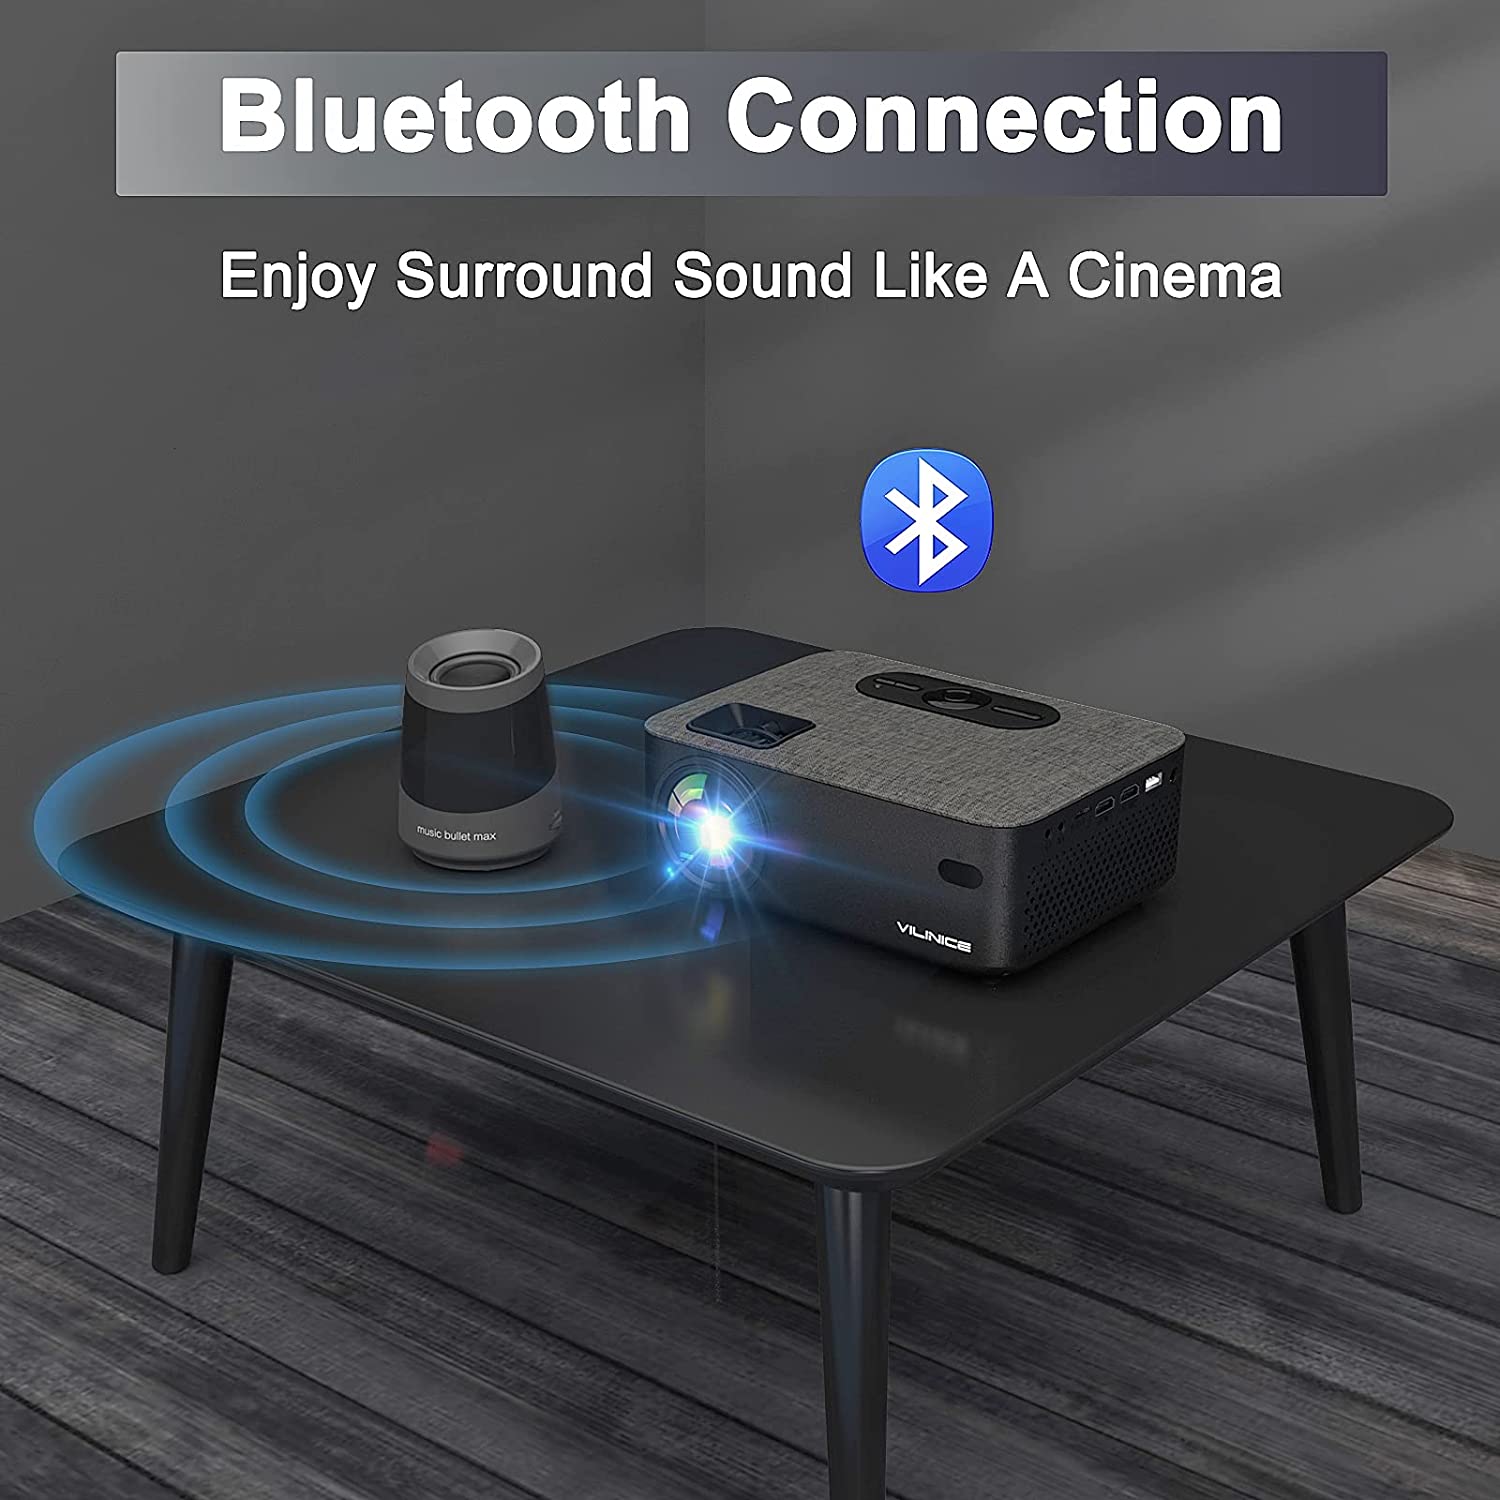 Vilinice 6000 Lux WiFi Projector, Bluetooth Mini Projector with Synchronize Smartphone Screen, Supports 1080P HD 240"Display